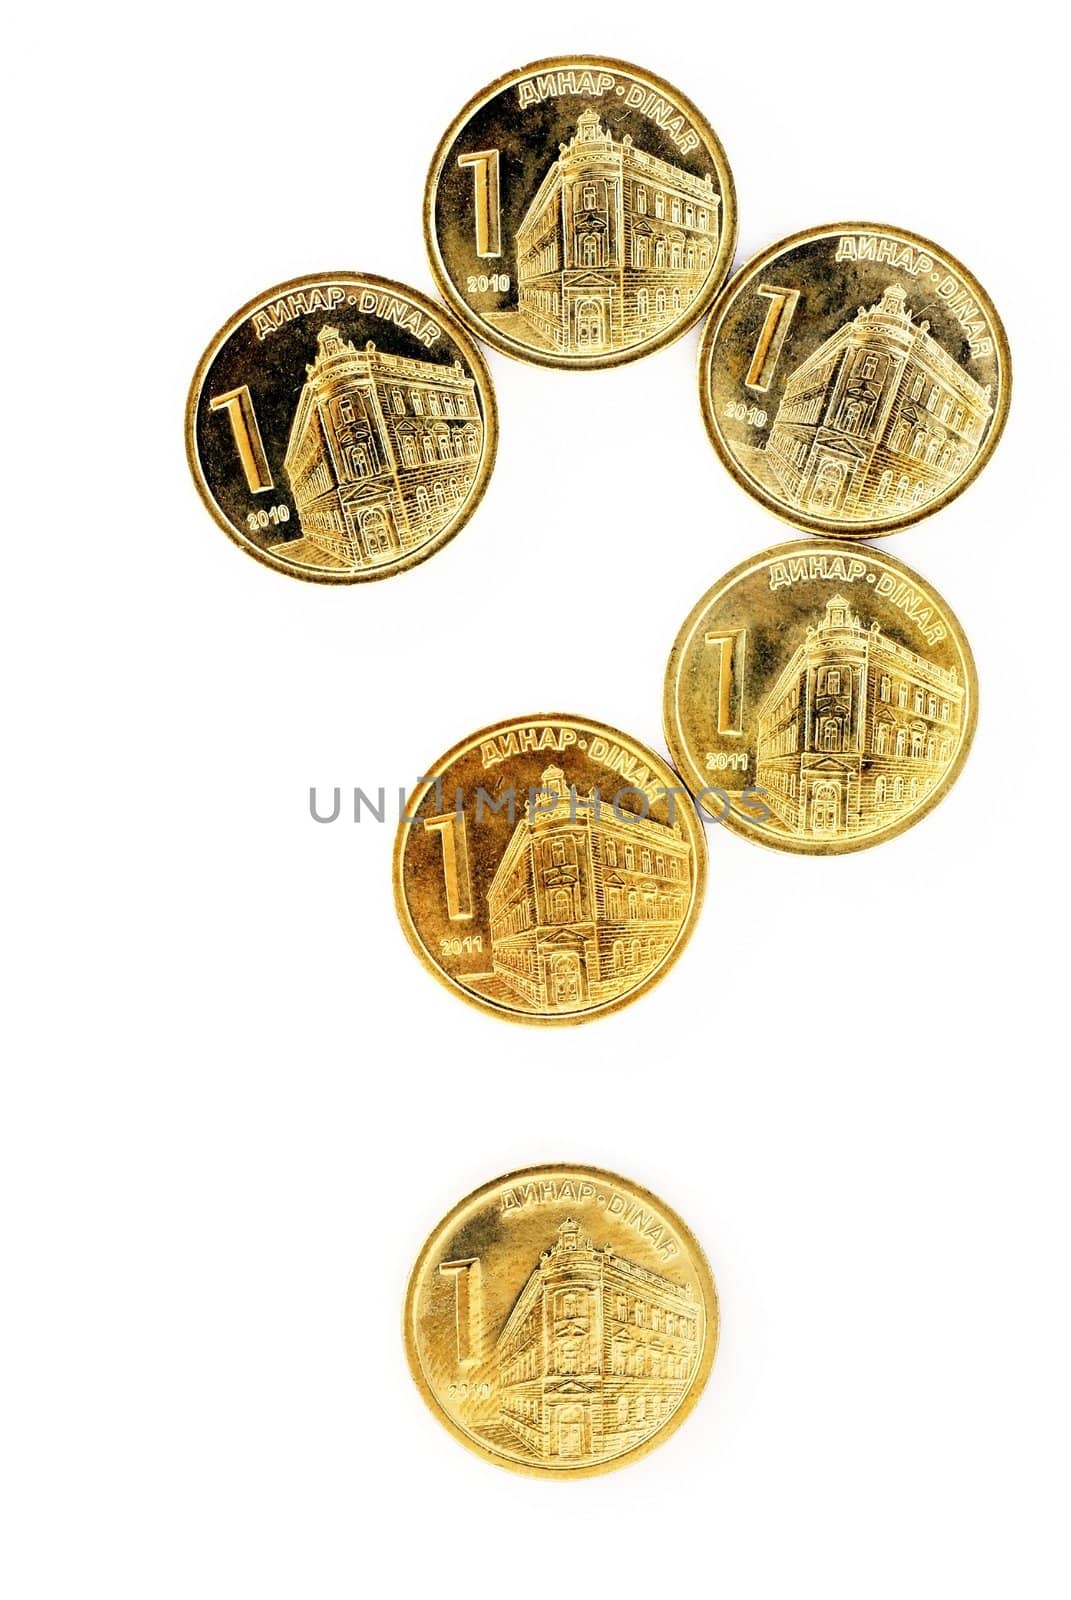 Serbian dinar coins by simply